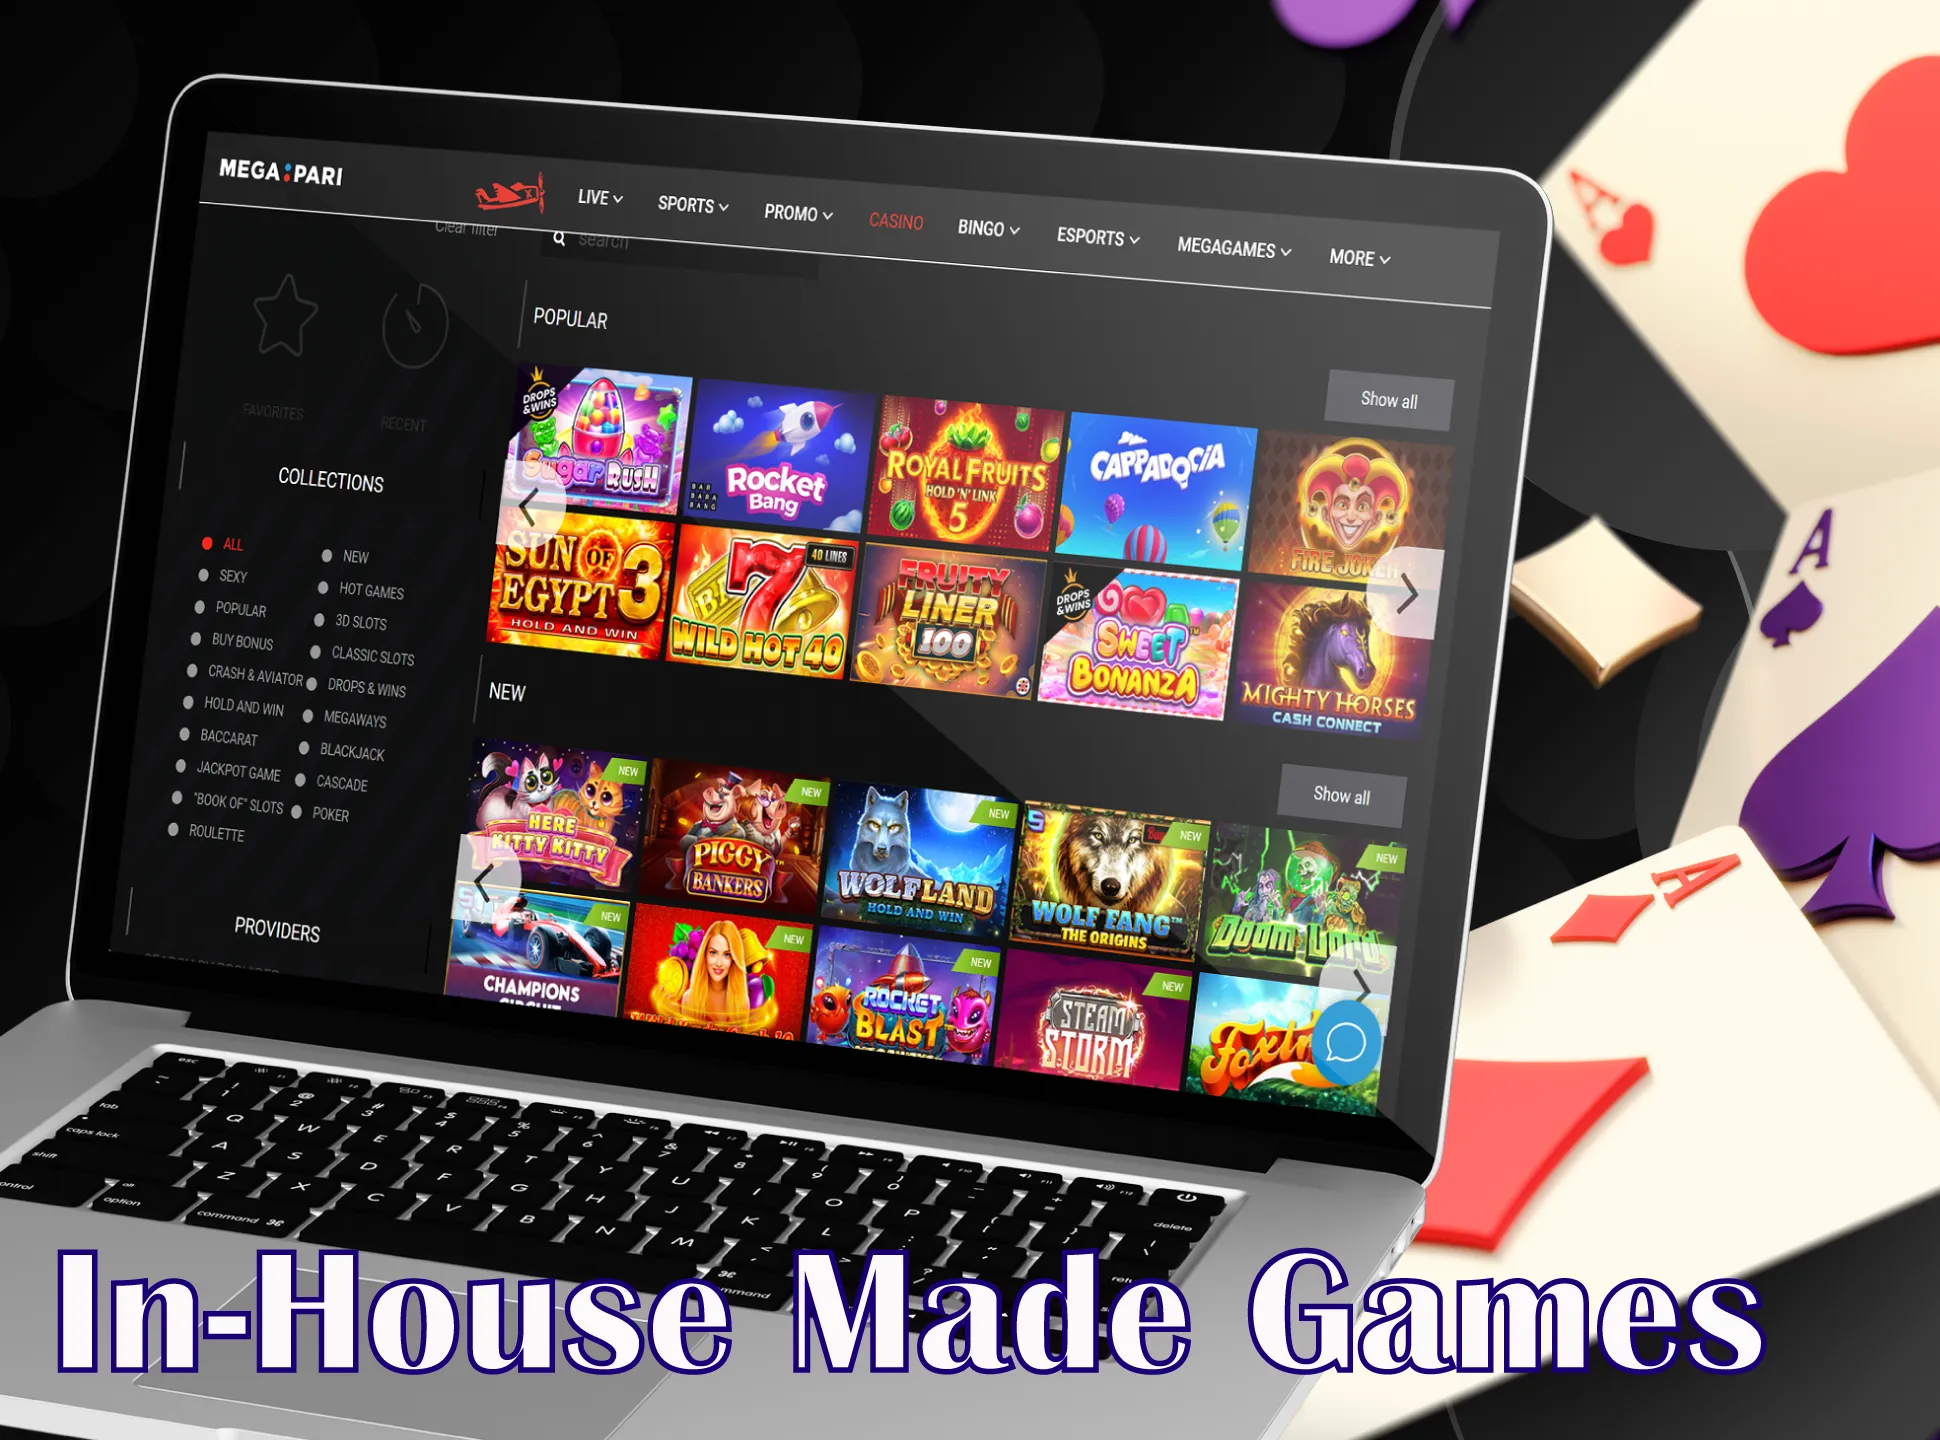 You can find special games provided by the online casino.